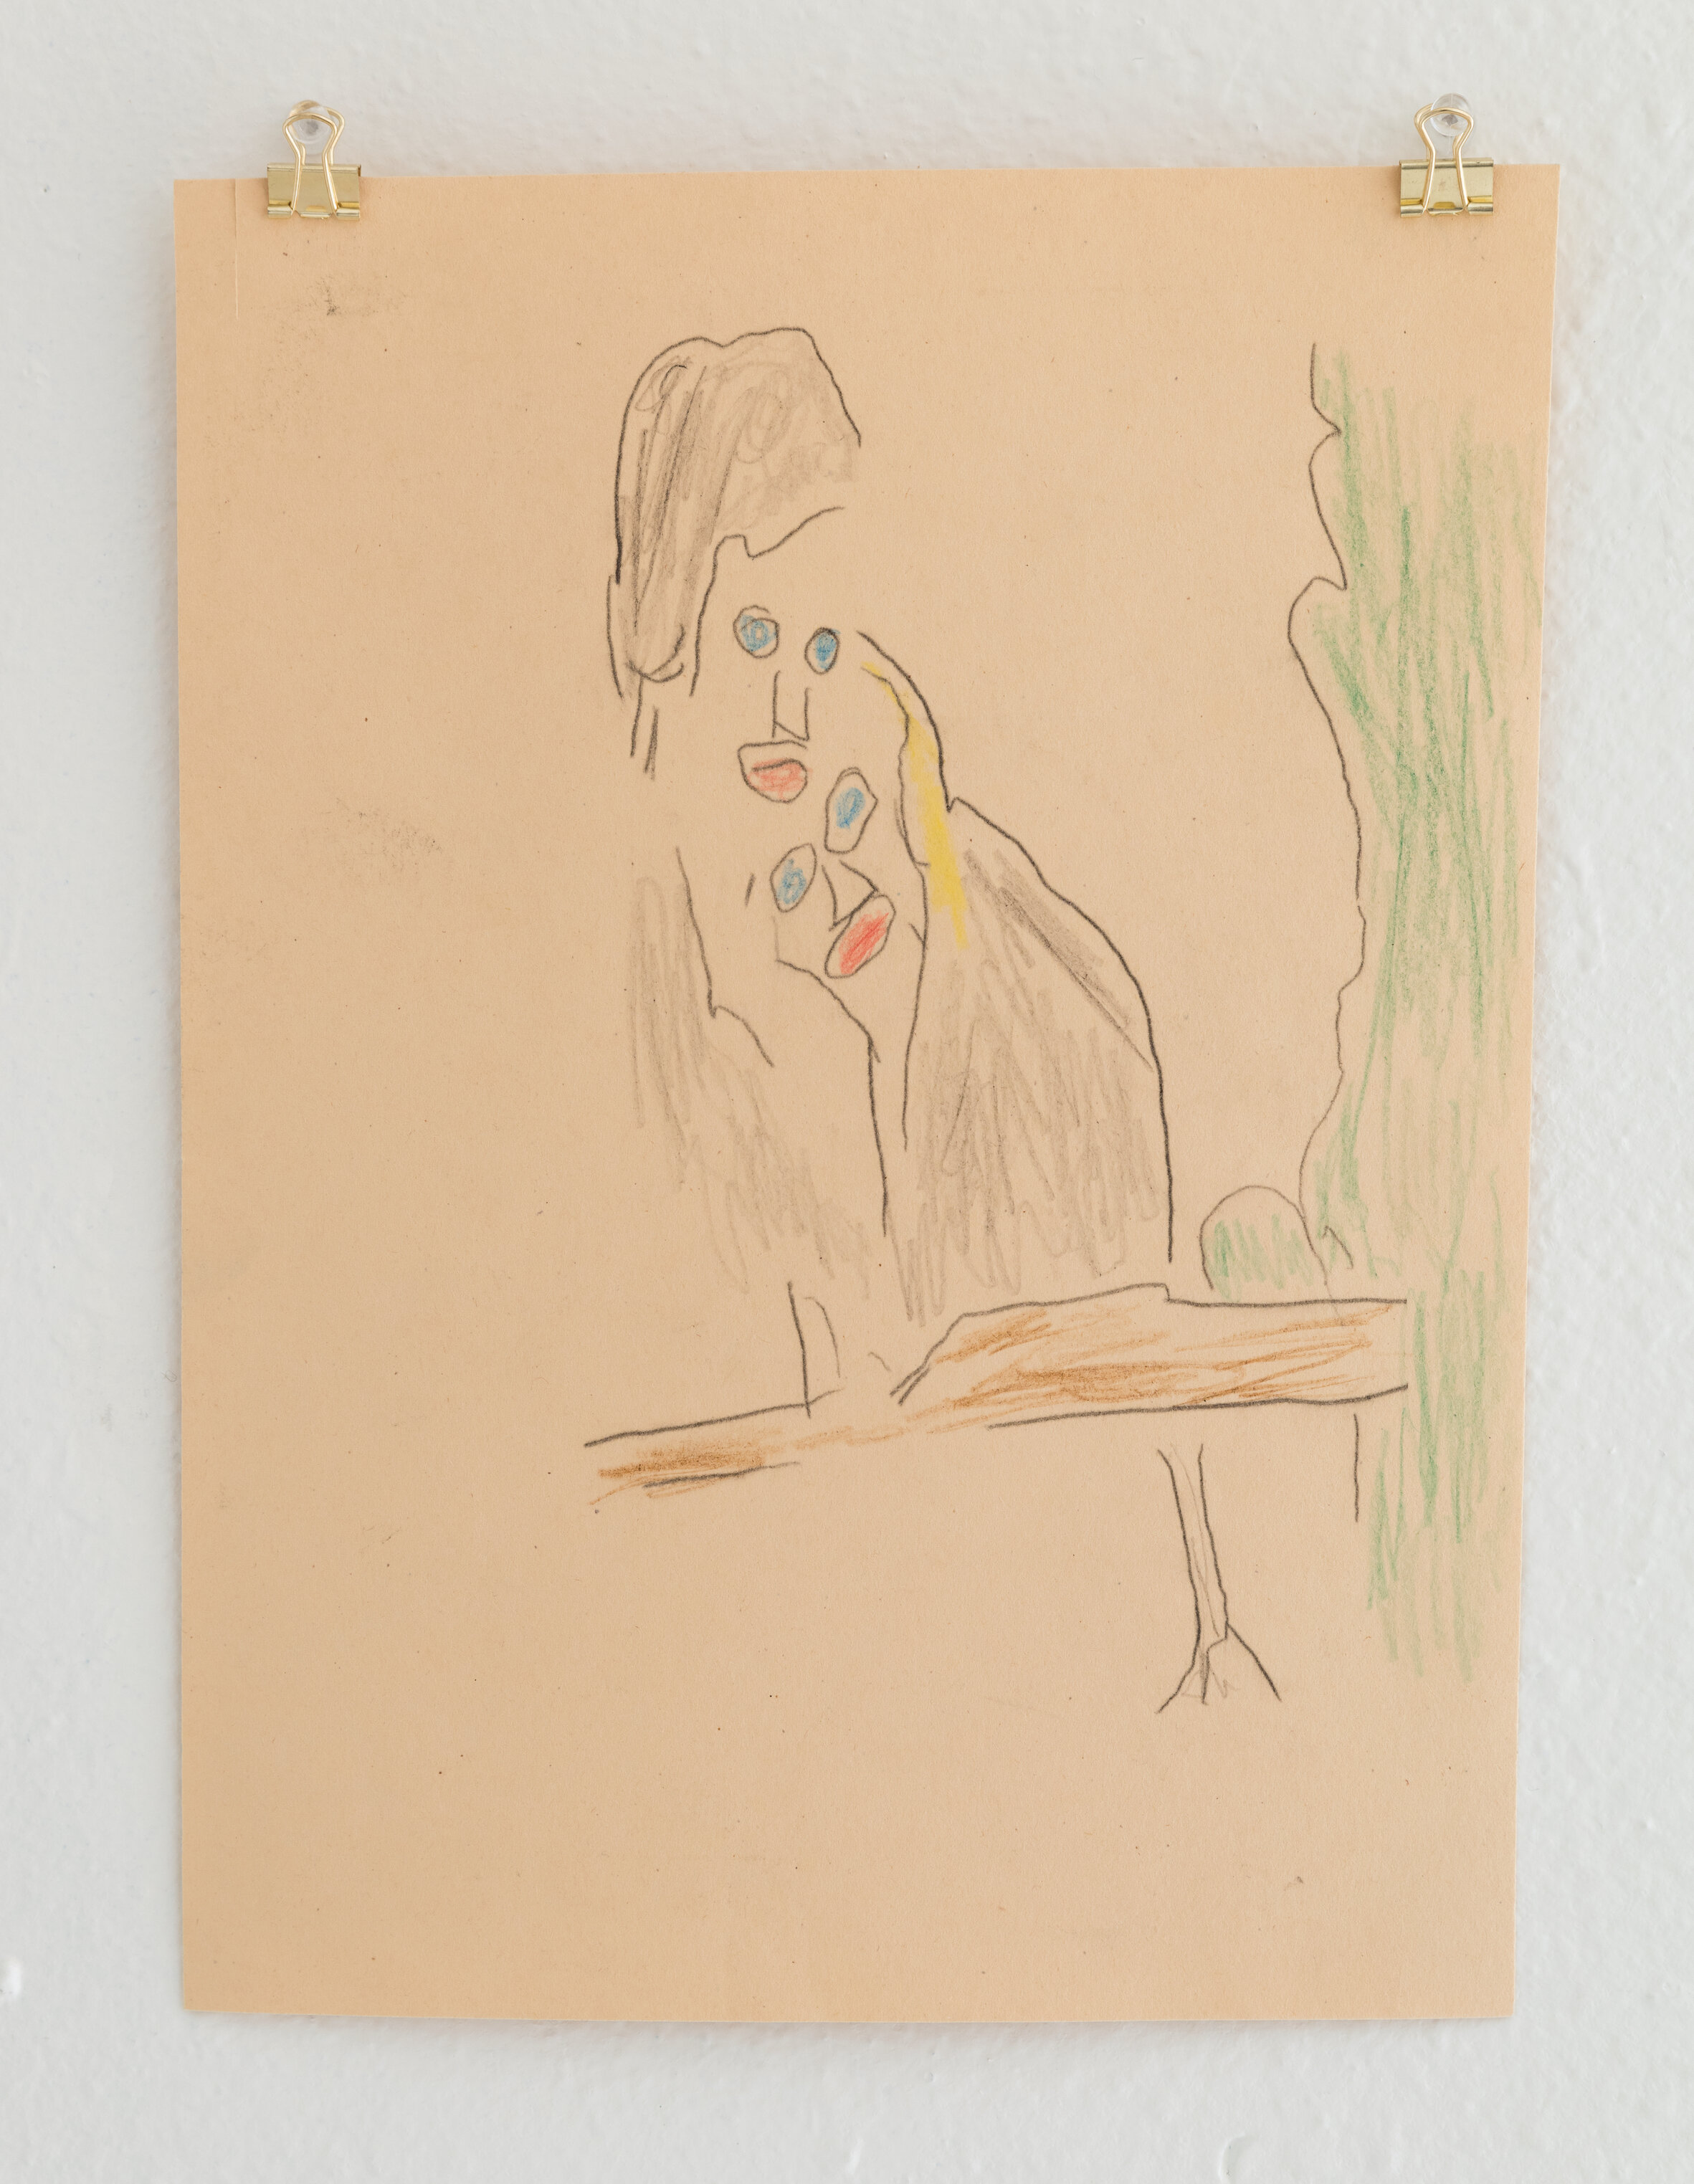  Shannon Anderson​ , Untitled,  2​019, colored pencil on paper 12 x 9 inches  